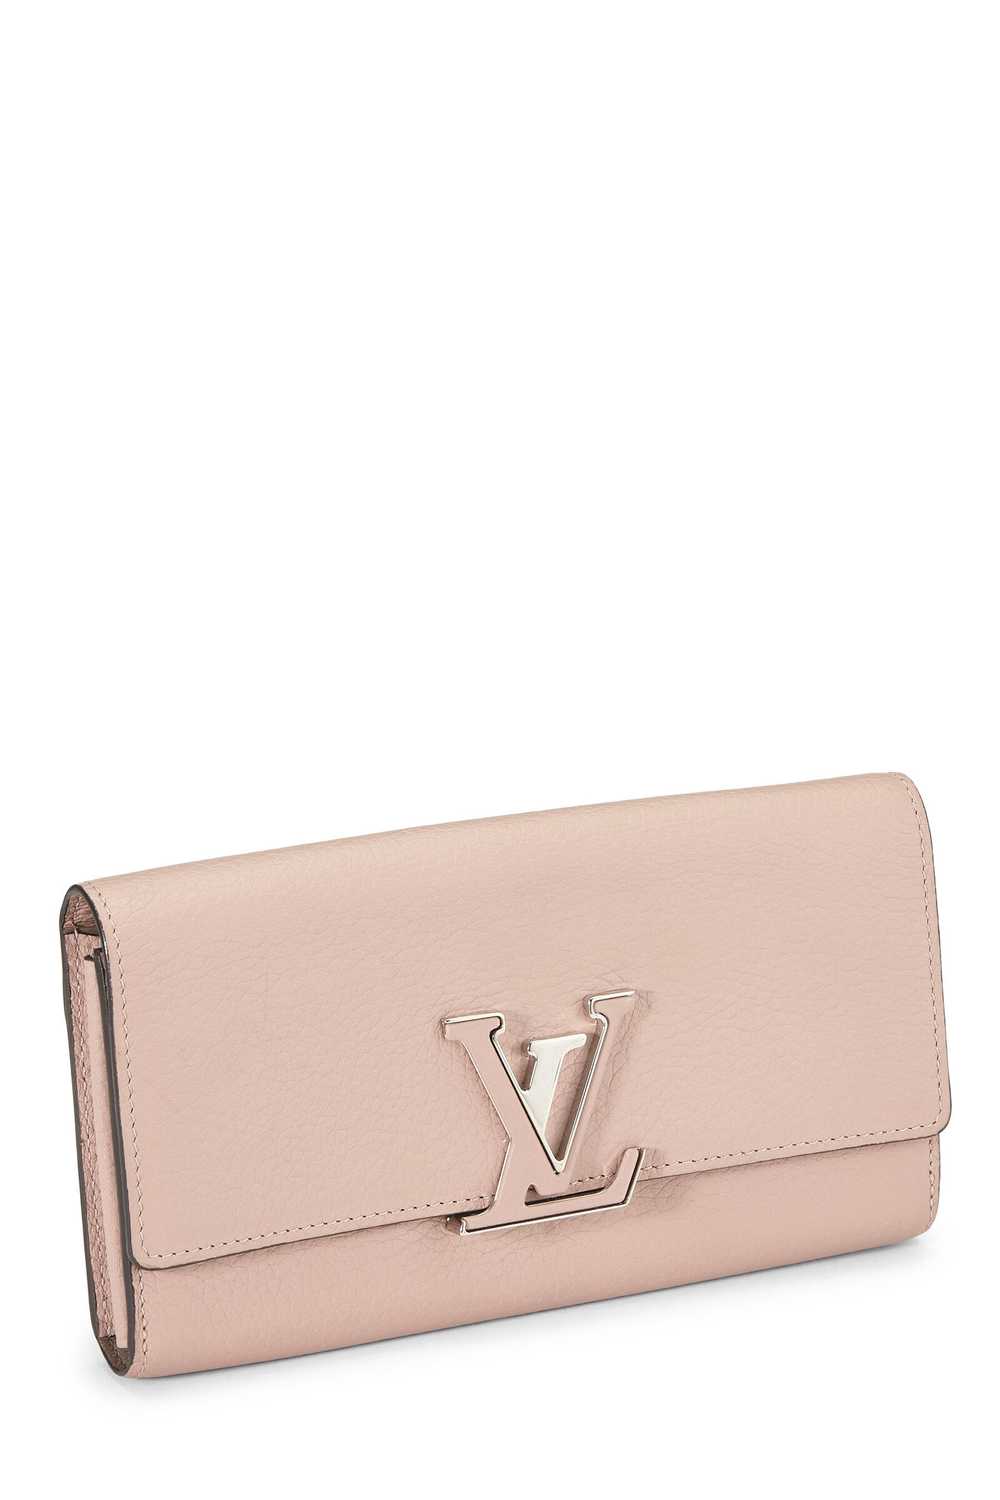 Pink Taurillon Leather Capucines Wallet - image 2